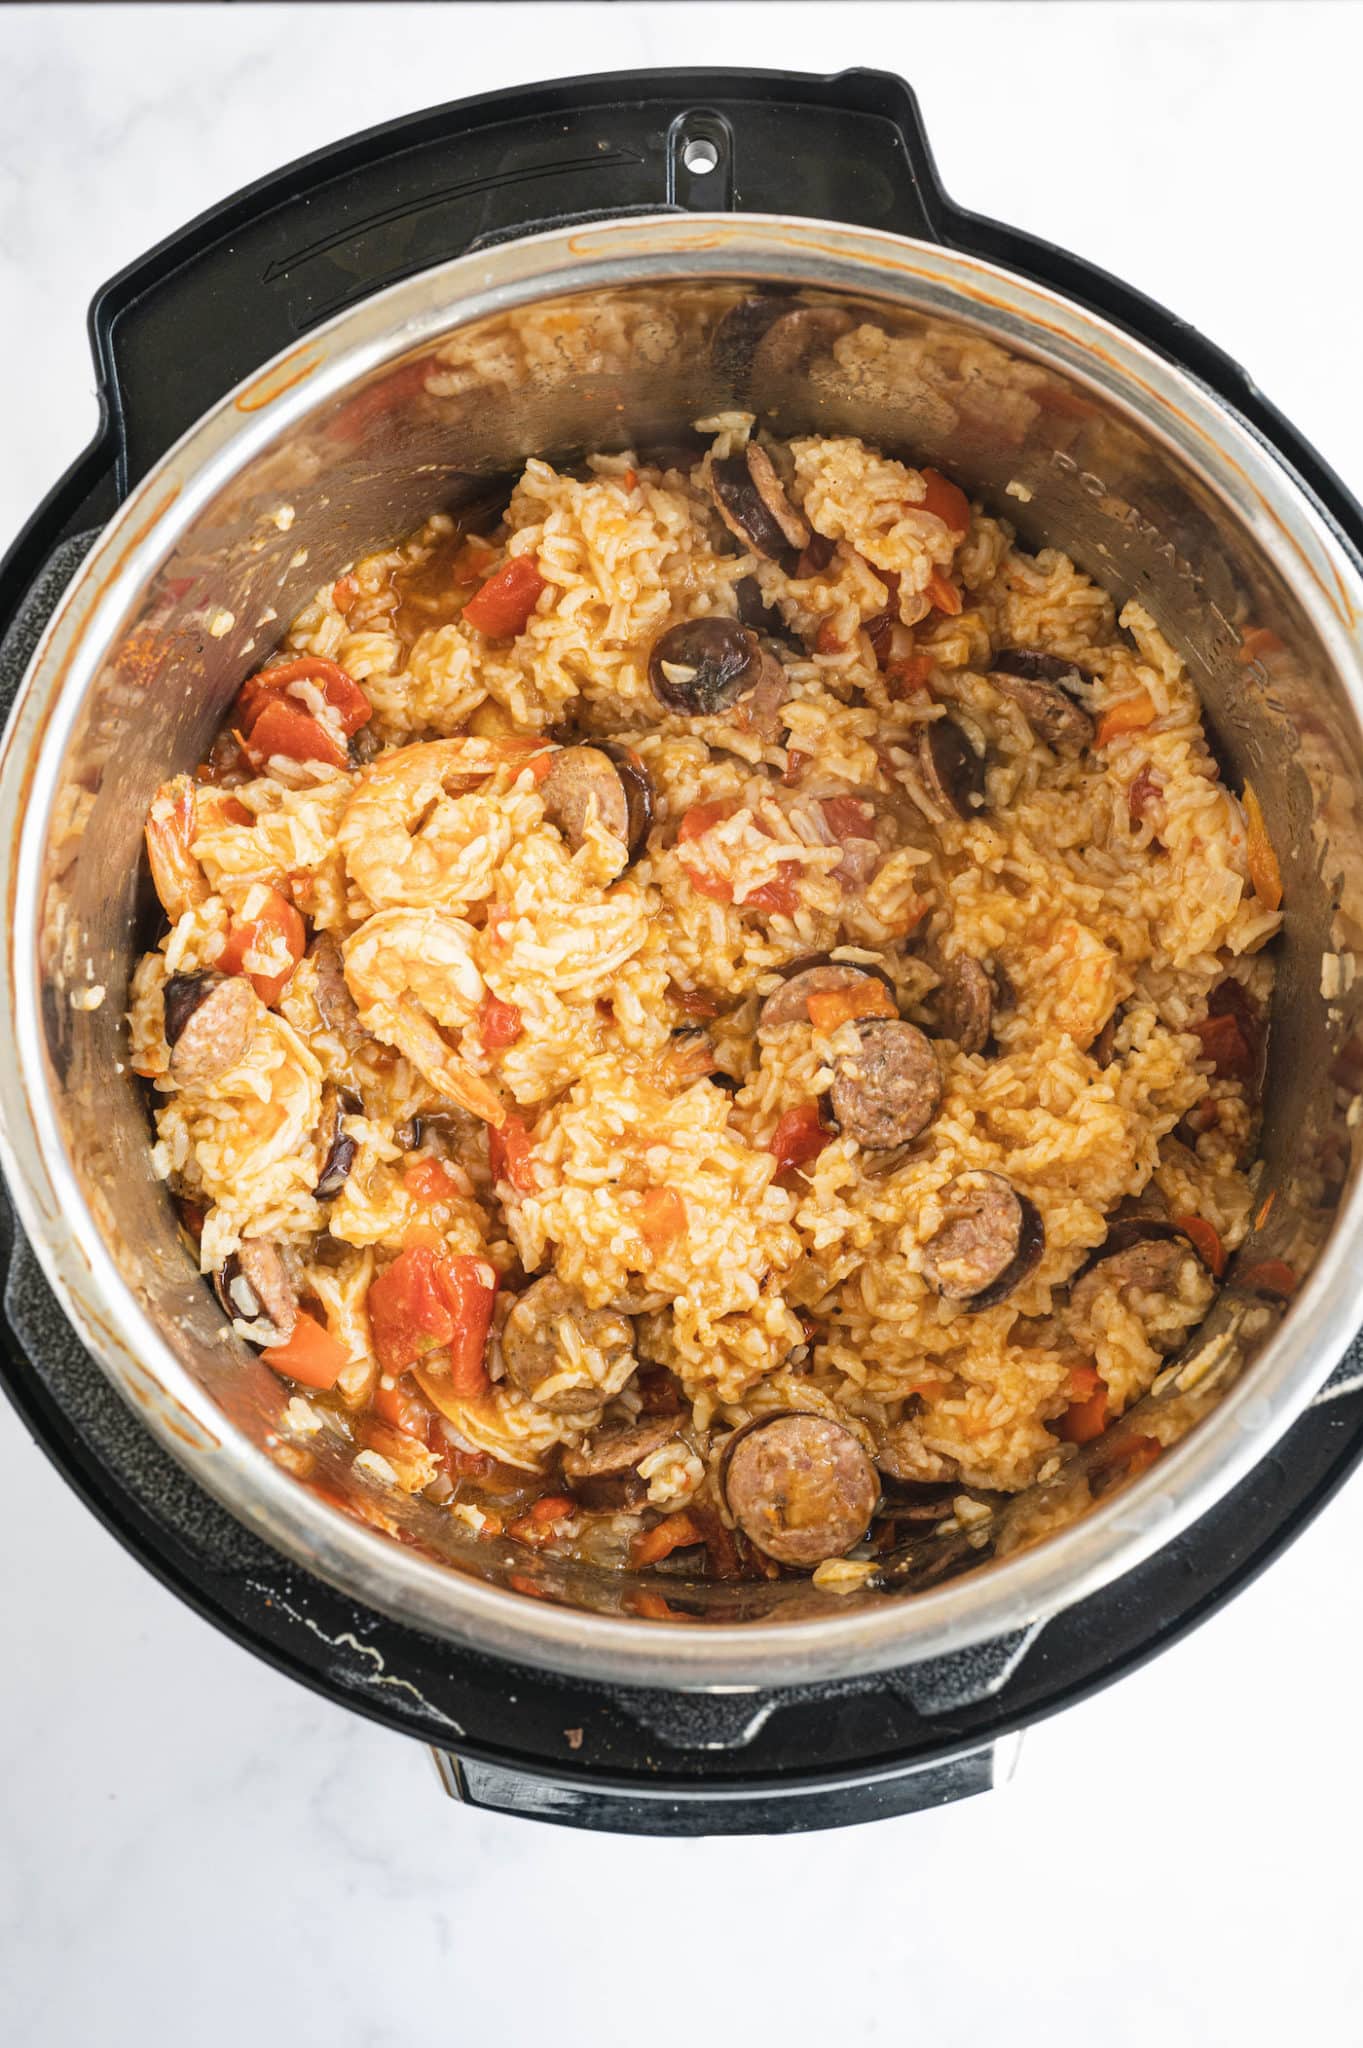 cooked instant pot jambalaya ready to be served.